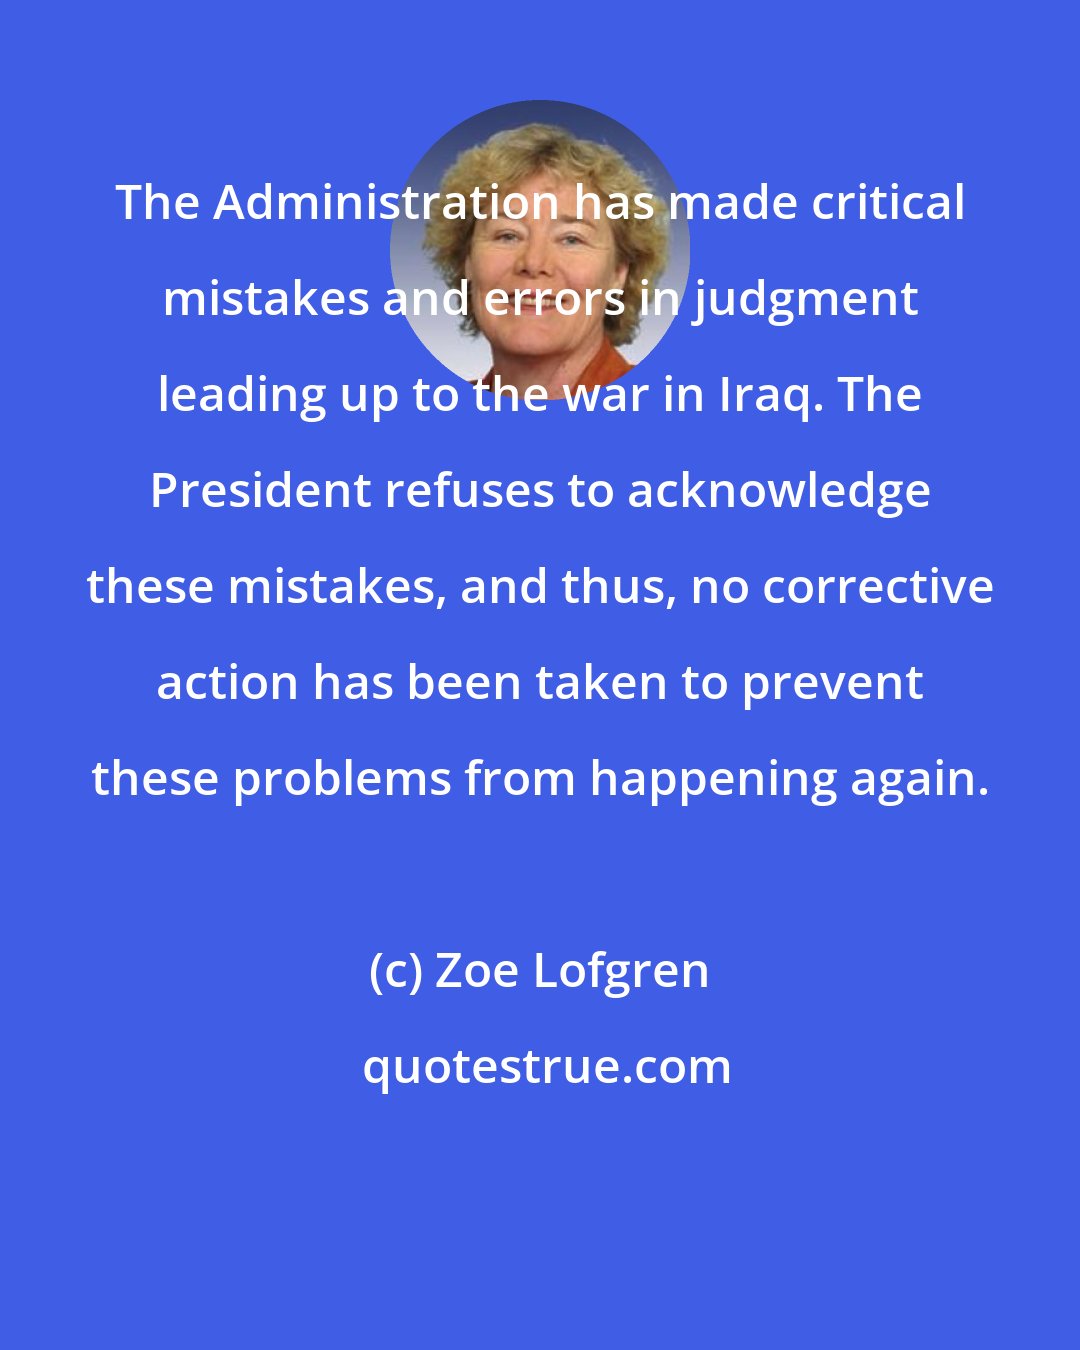 Zoe Lofgren: The Administration has made critical mistakes and errors in judgment leading up to the war in Iraq. The President refuses to acknowledge these mistakes, and thus, no corrective action has been taken to prevent these problems from happening again.